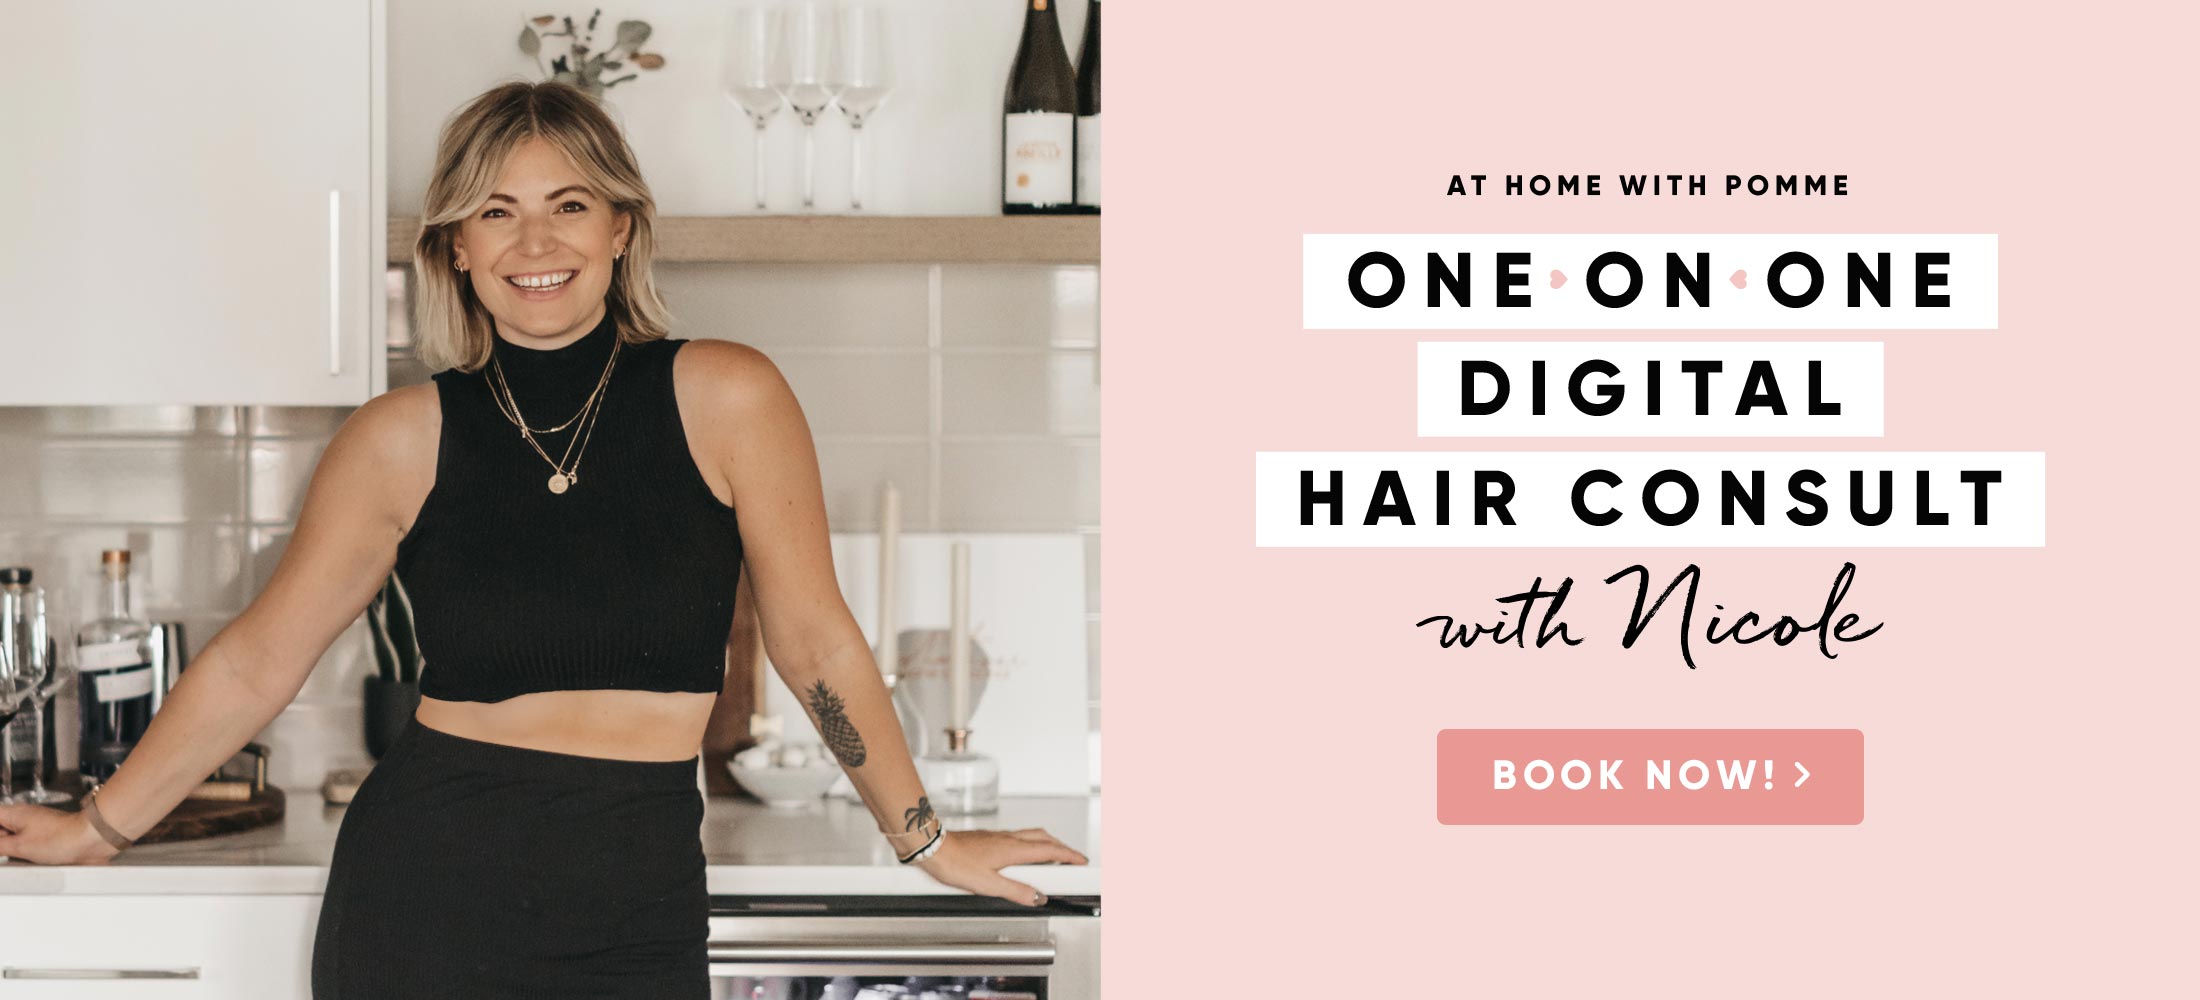 At home with Pomme - One on one digital hair consult